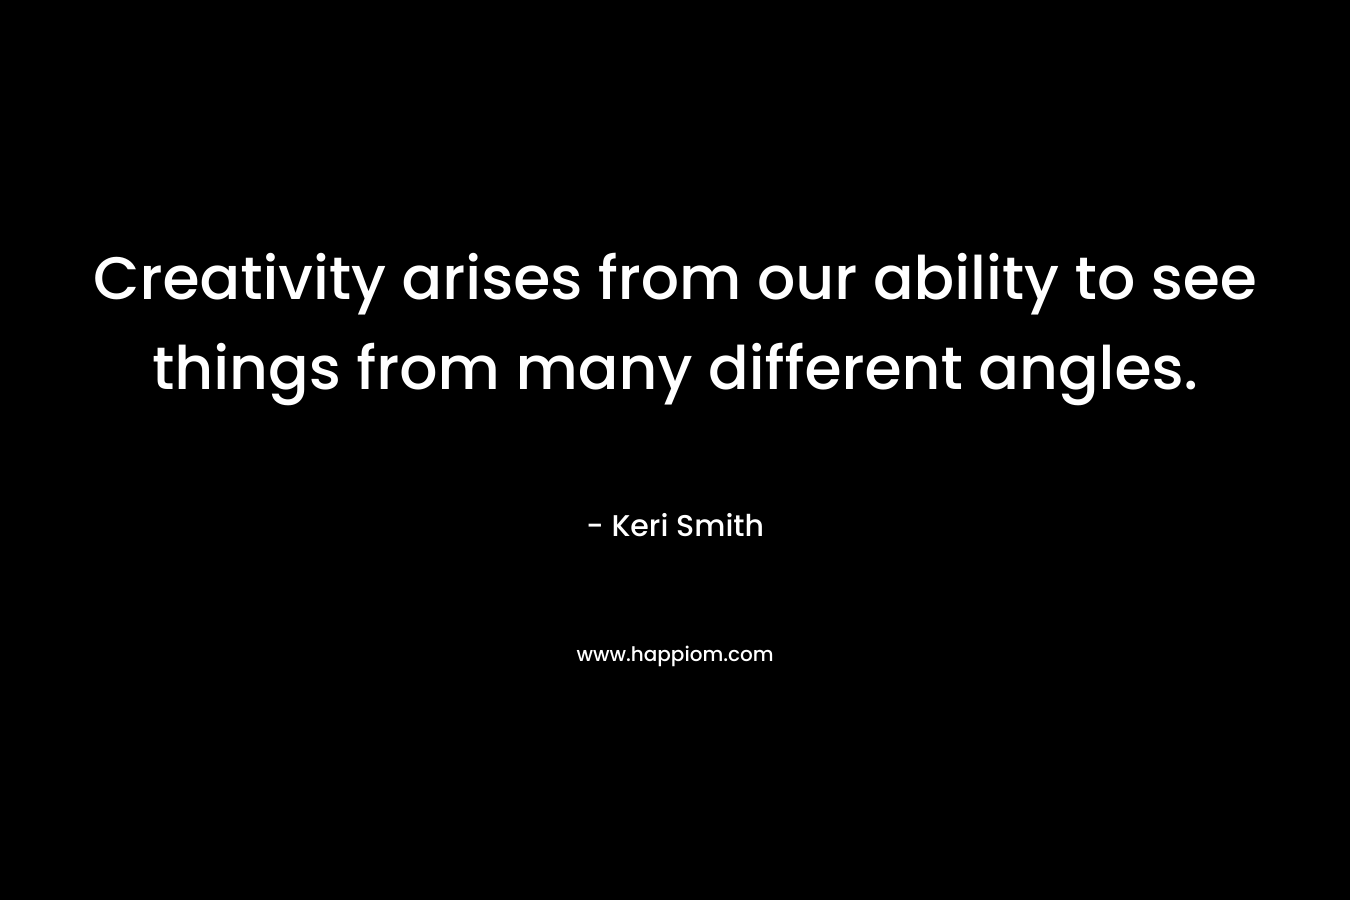 Creativity arises from our ability to see things from many different angles.